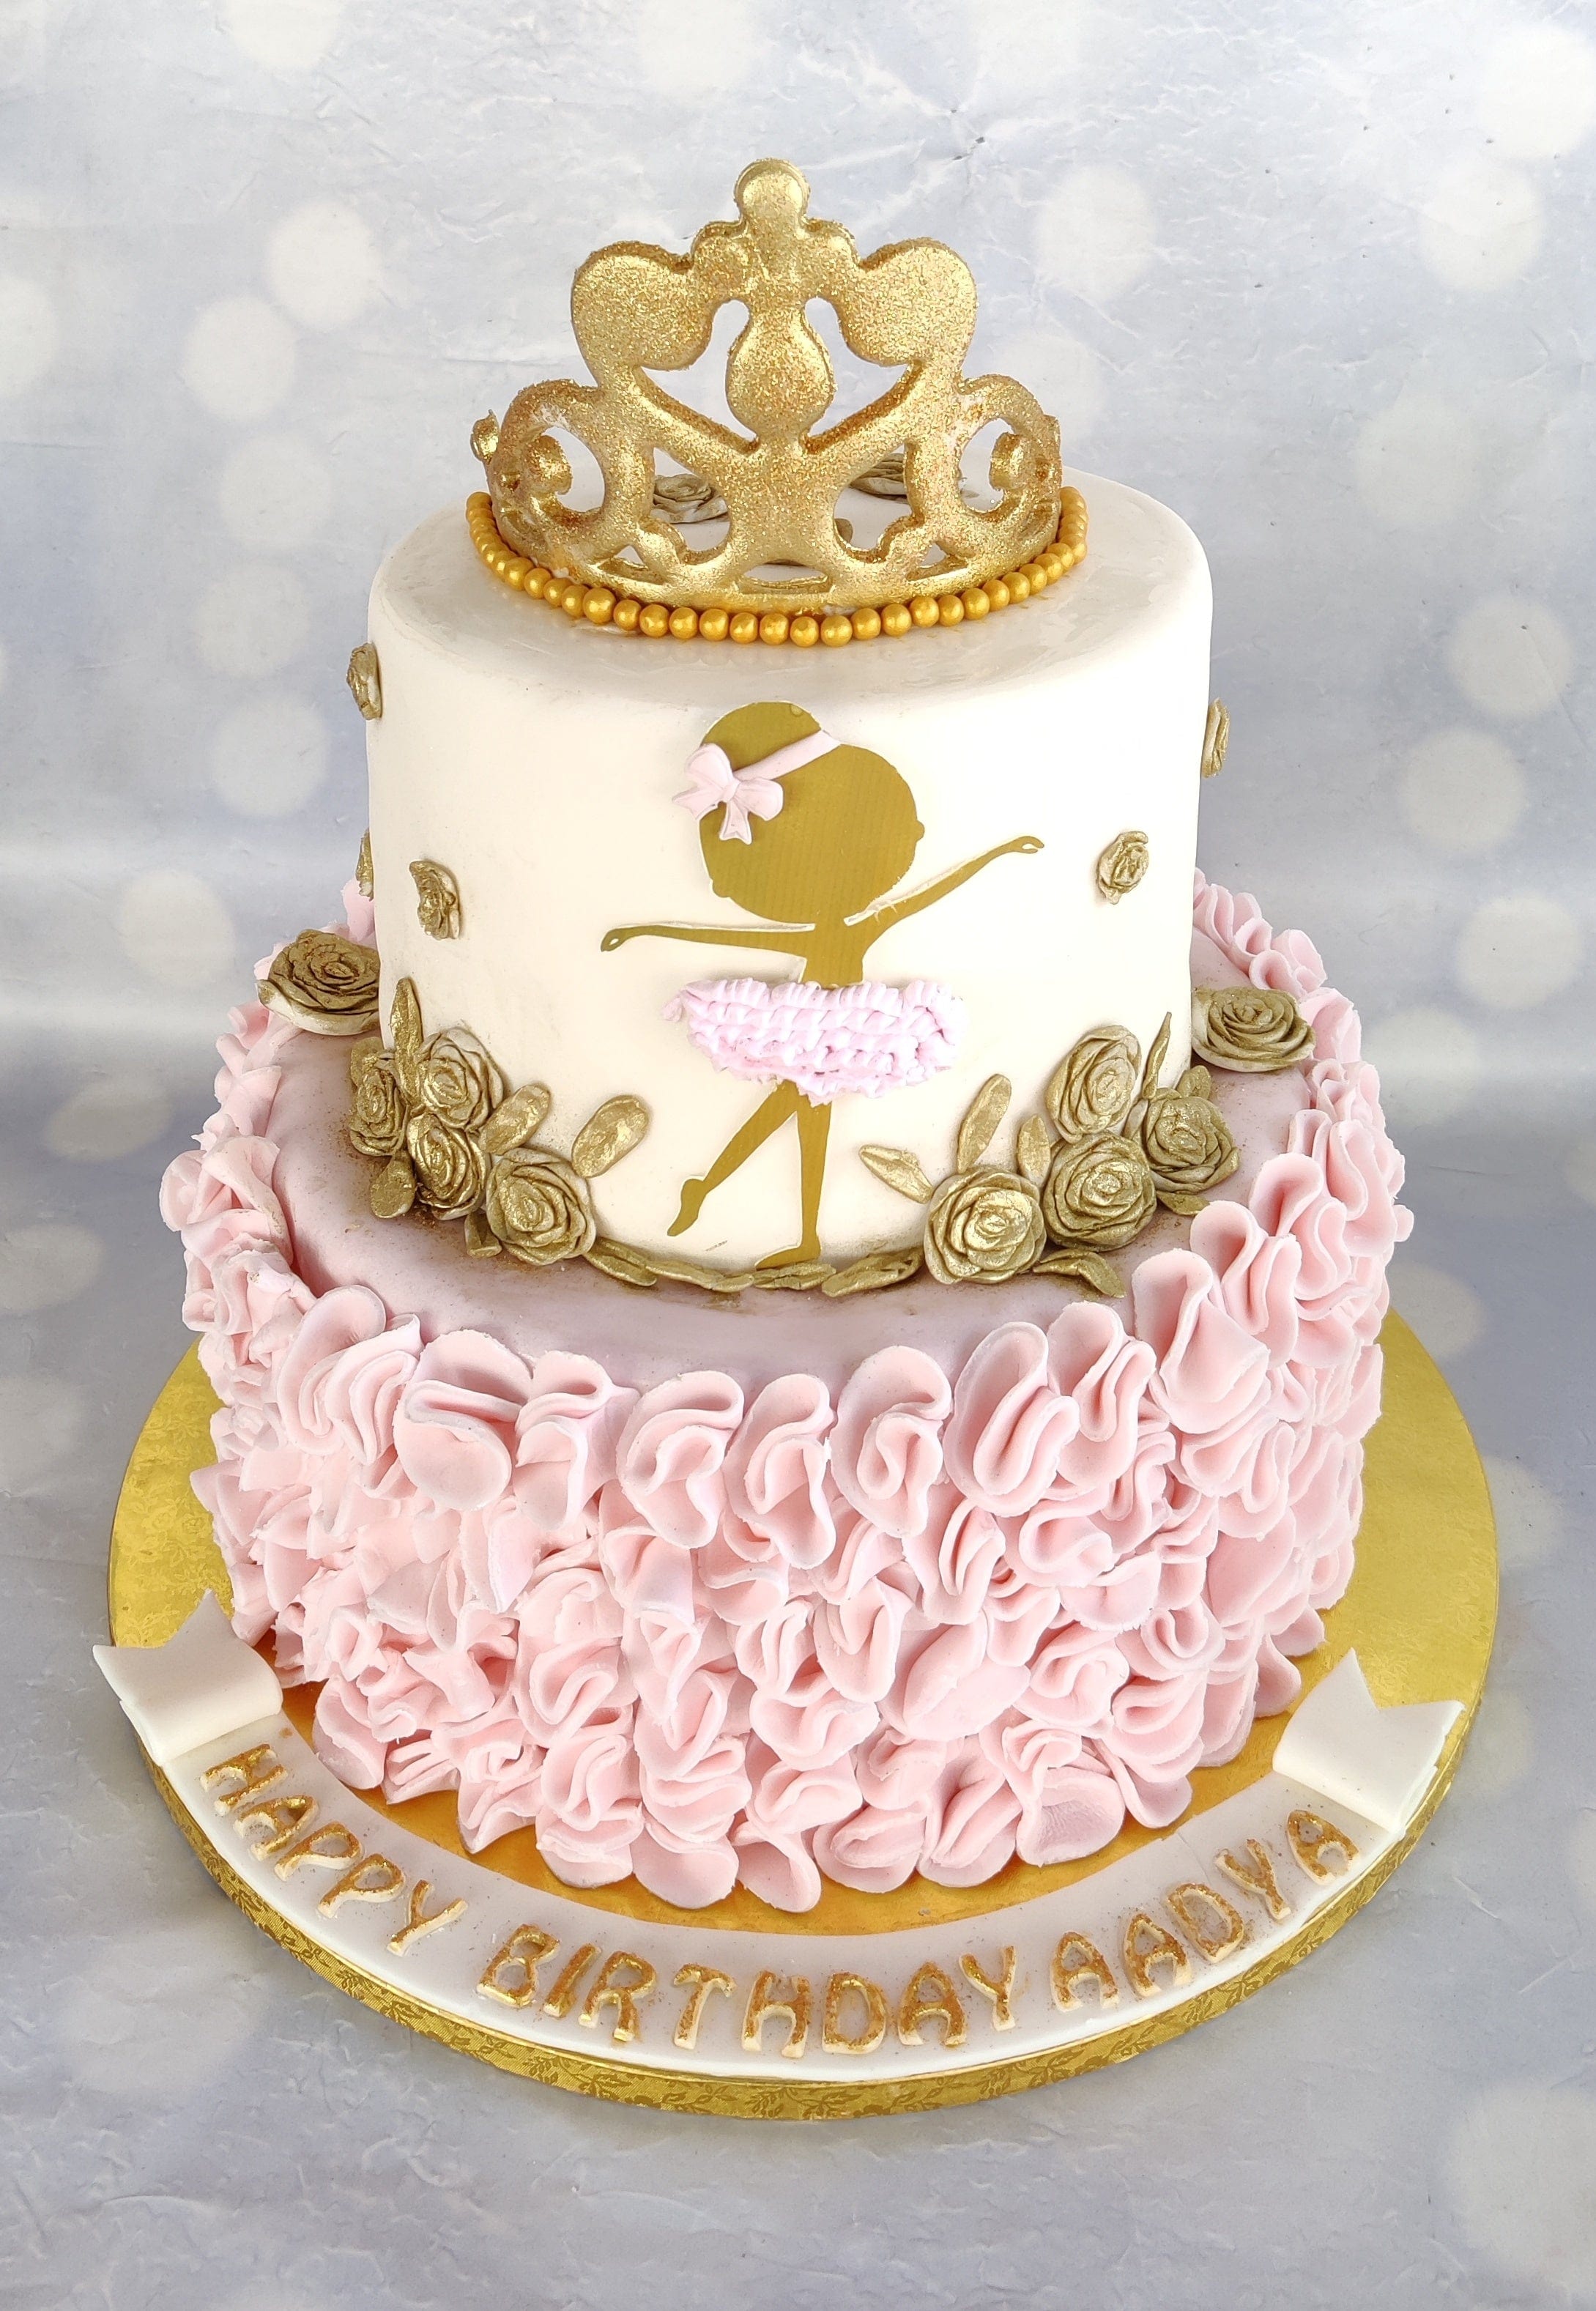 All Of The Most Beautiful Ballerina Cakes: Part 1 - Cake Geek Magazine